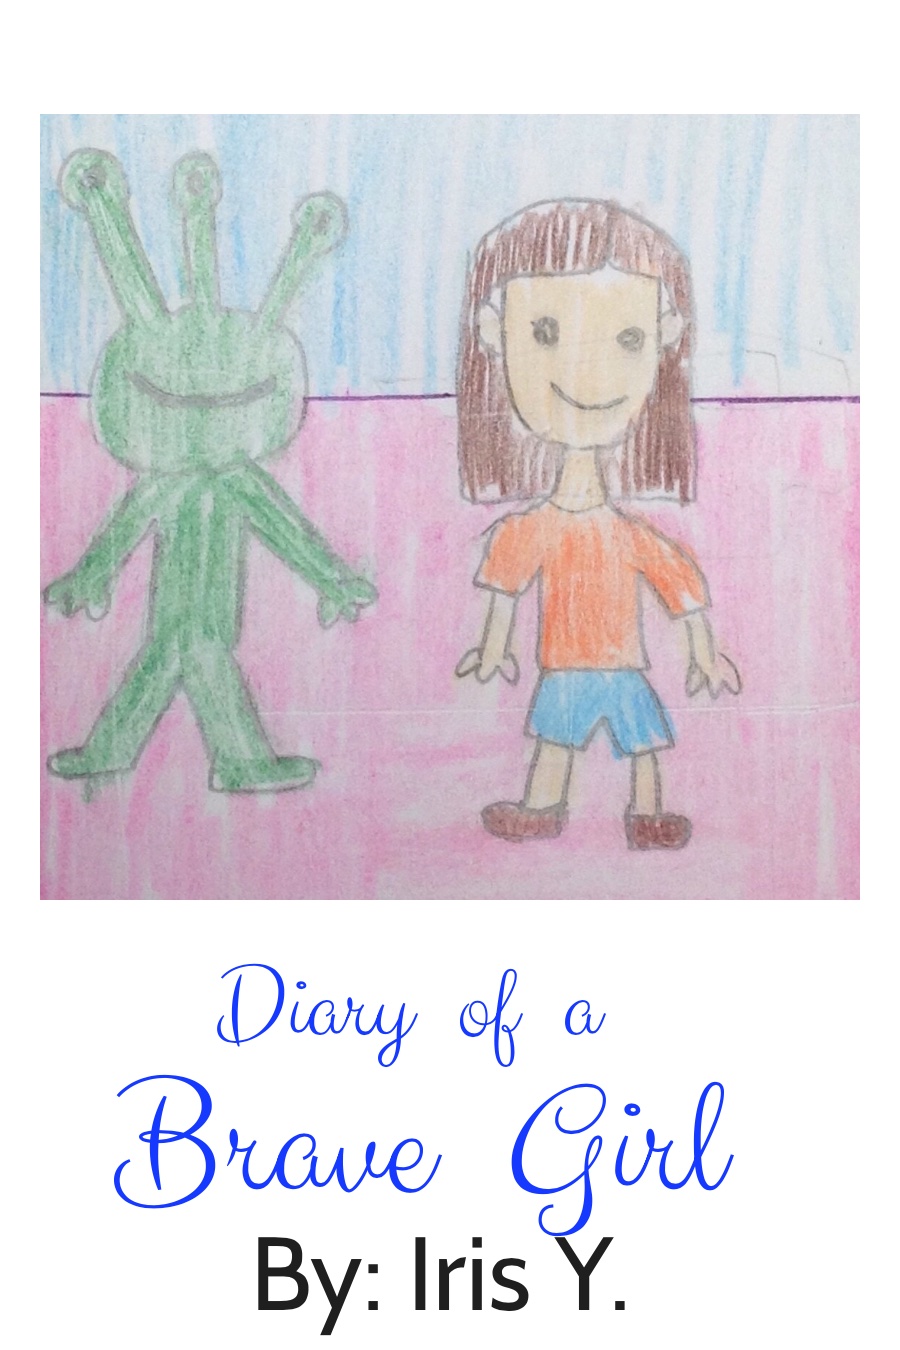 Diary of a Brave Girl by Iris Y